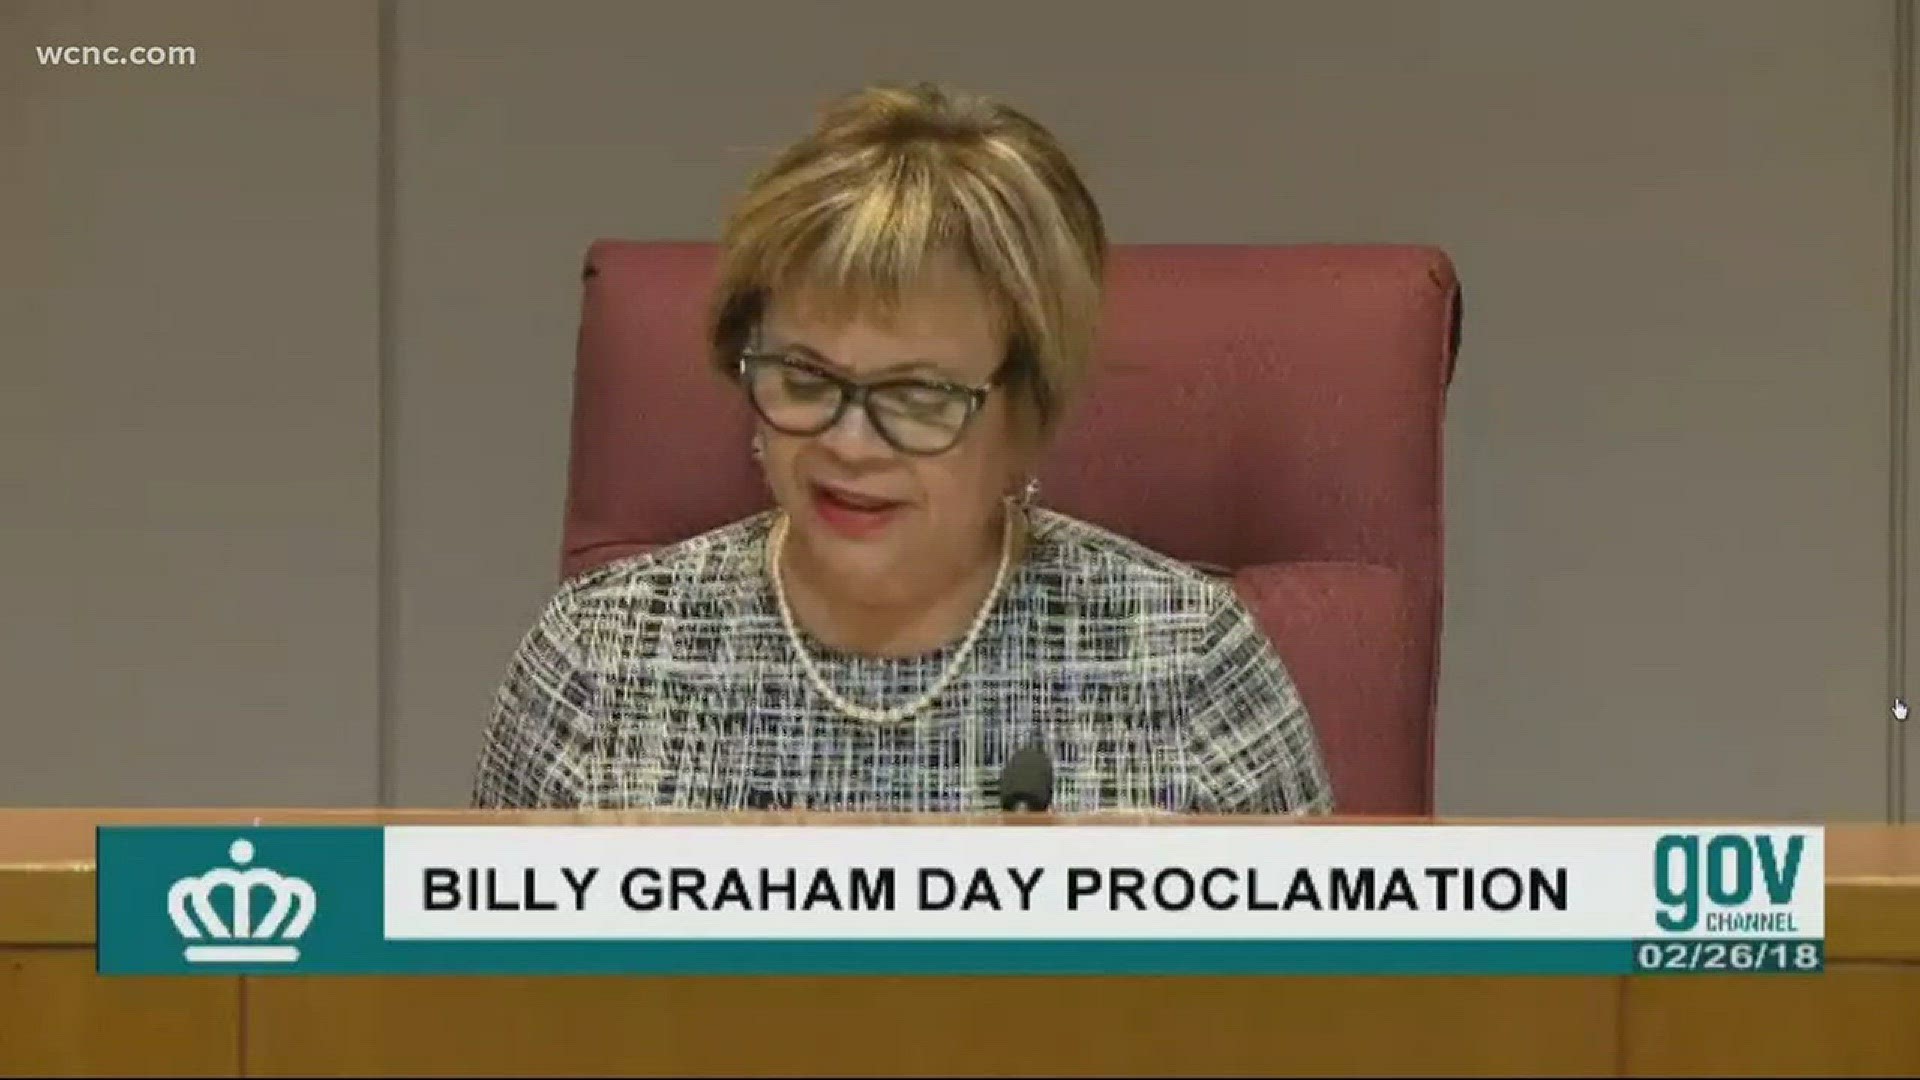 Mayor Vi Lyles declared that March 2 will be known as Billy Graham Day in Charlotte to honor Rev. Billy Graham.